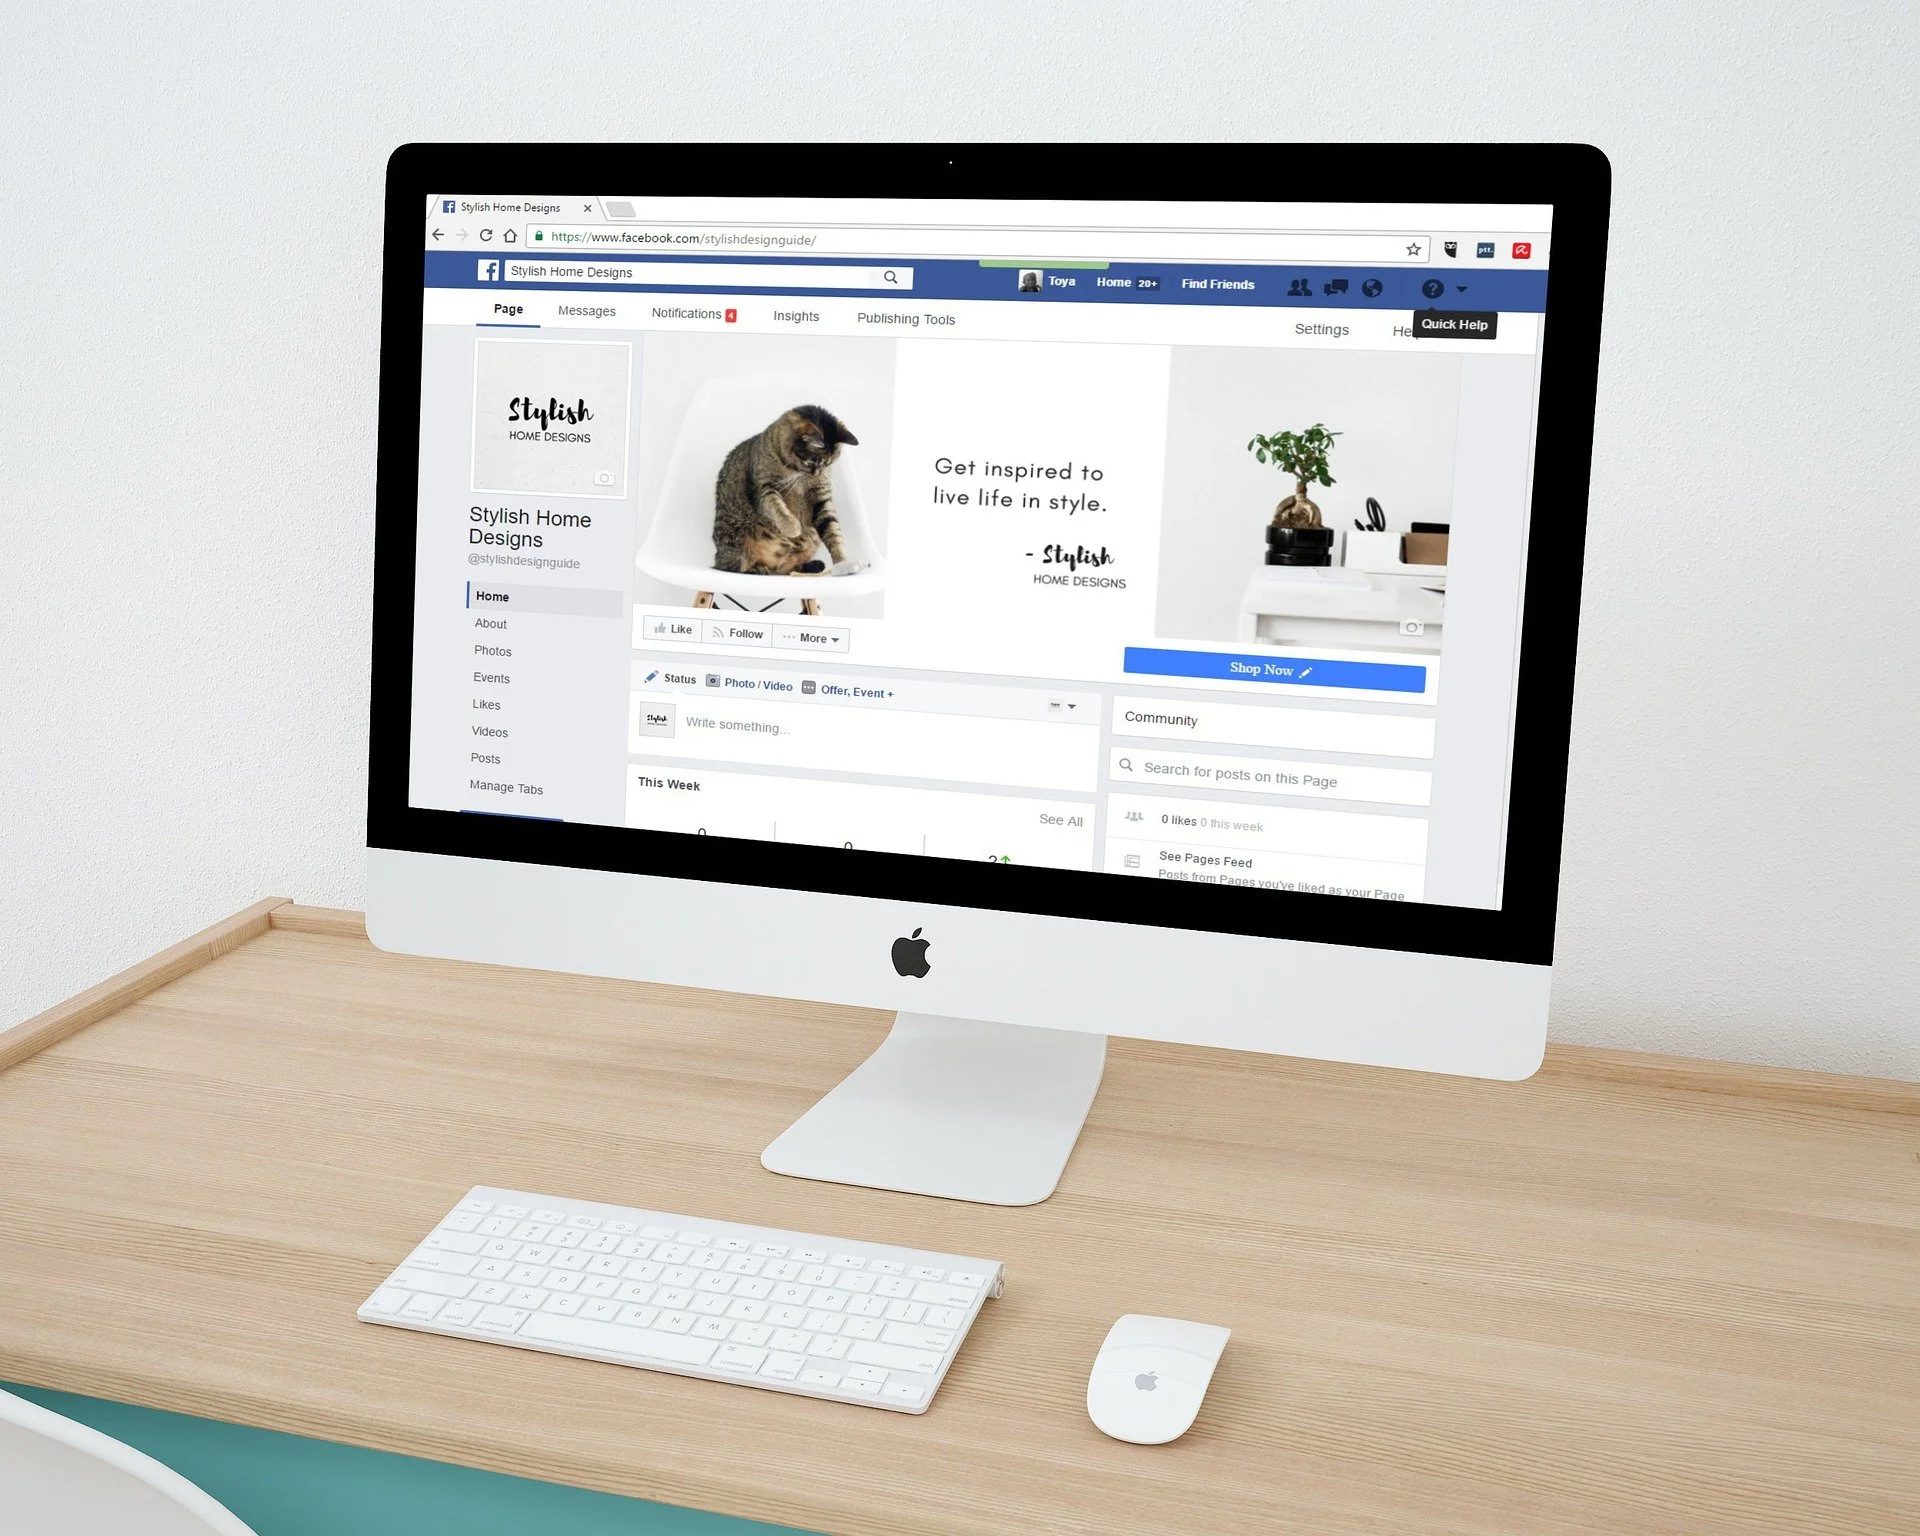 How to earn money from Facebook